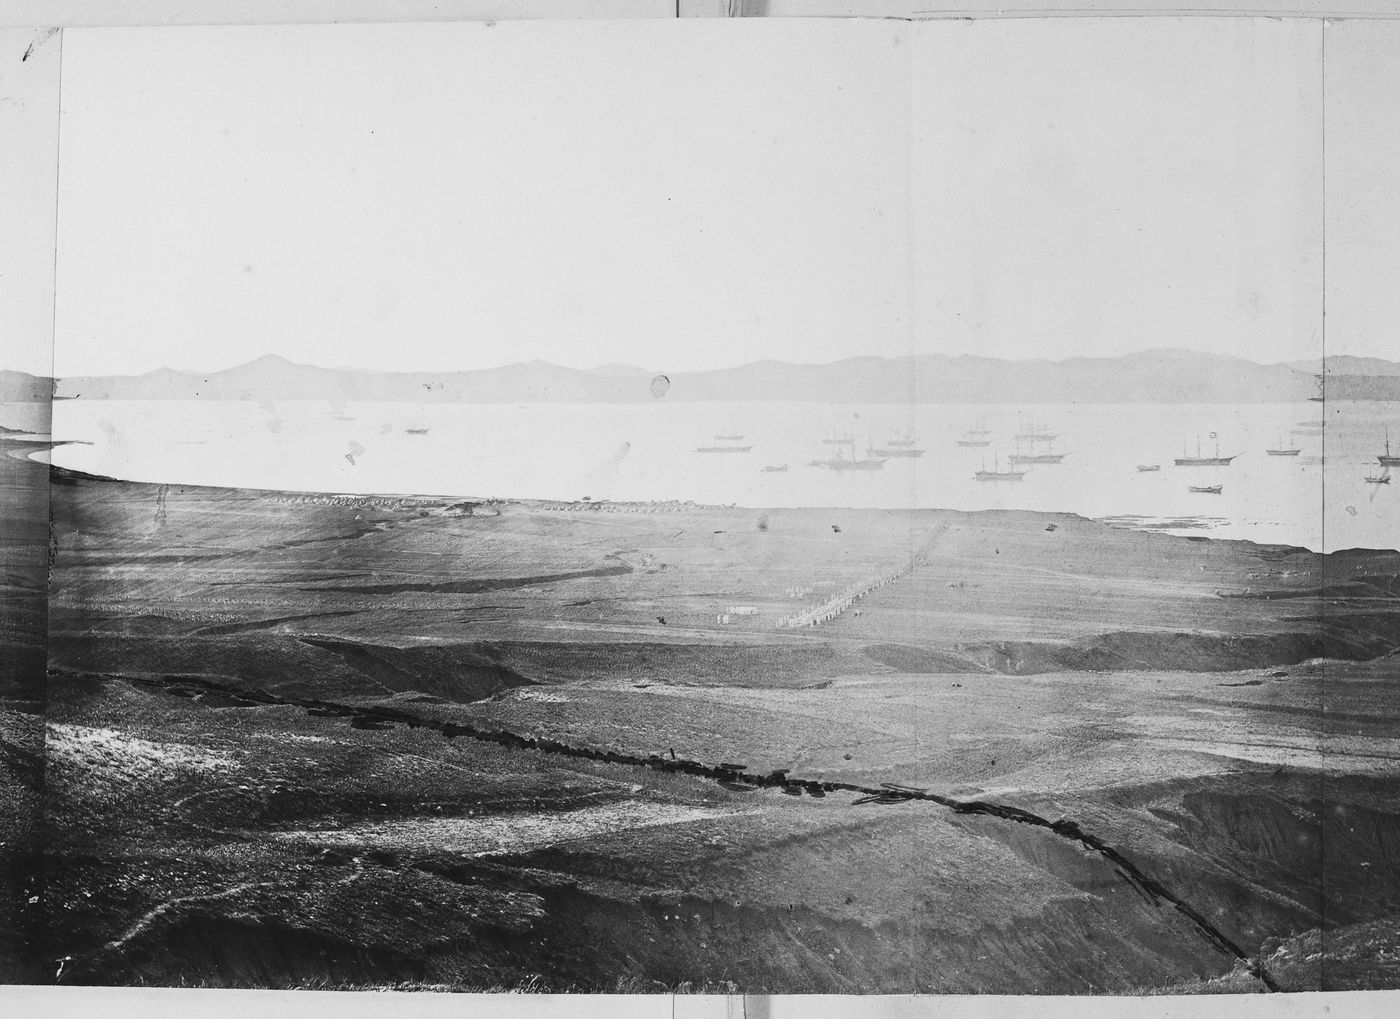 View of Victoria Bay, adjacent to Talien Bay (now Dalian Wan), showing military camps and farmland, near Ch'ing-ni-wa (now  part of Dalian), China